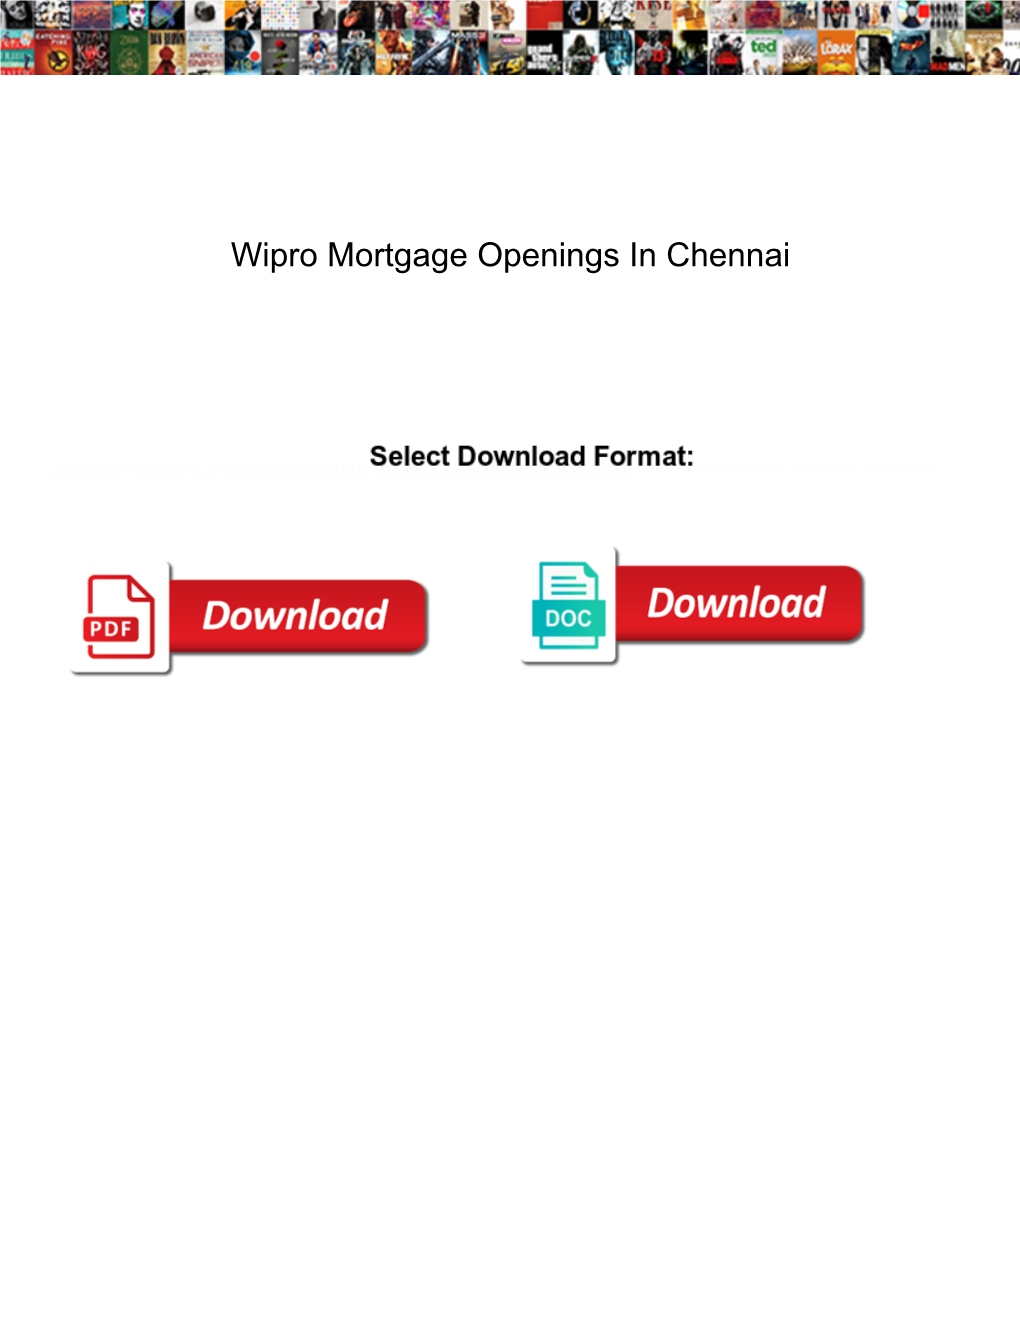 Wipro Mortgage Openings in Chennai